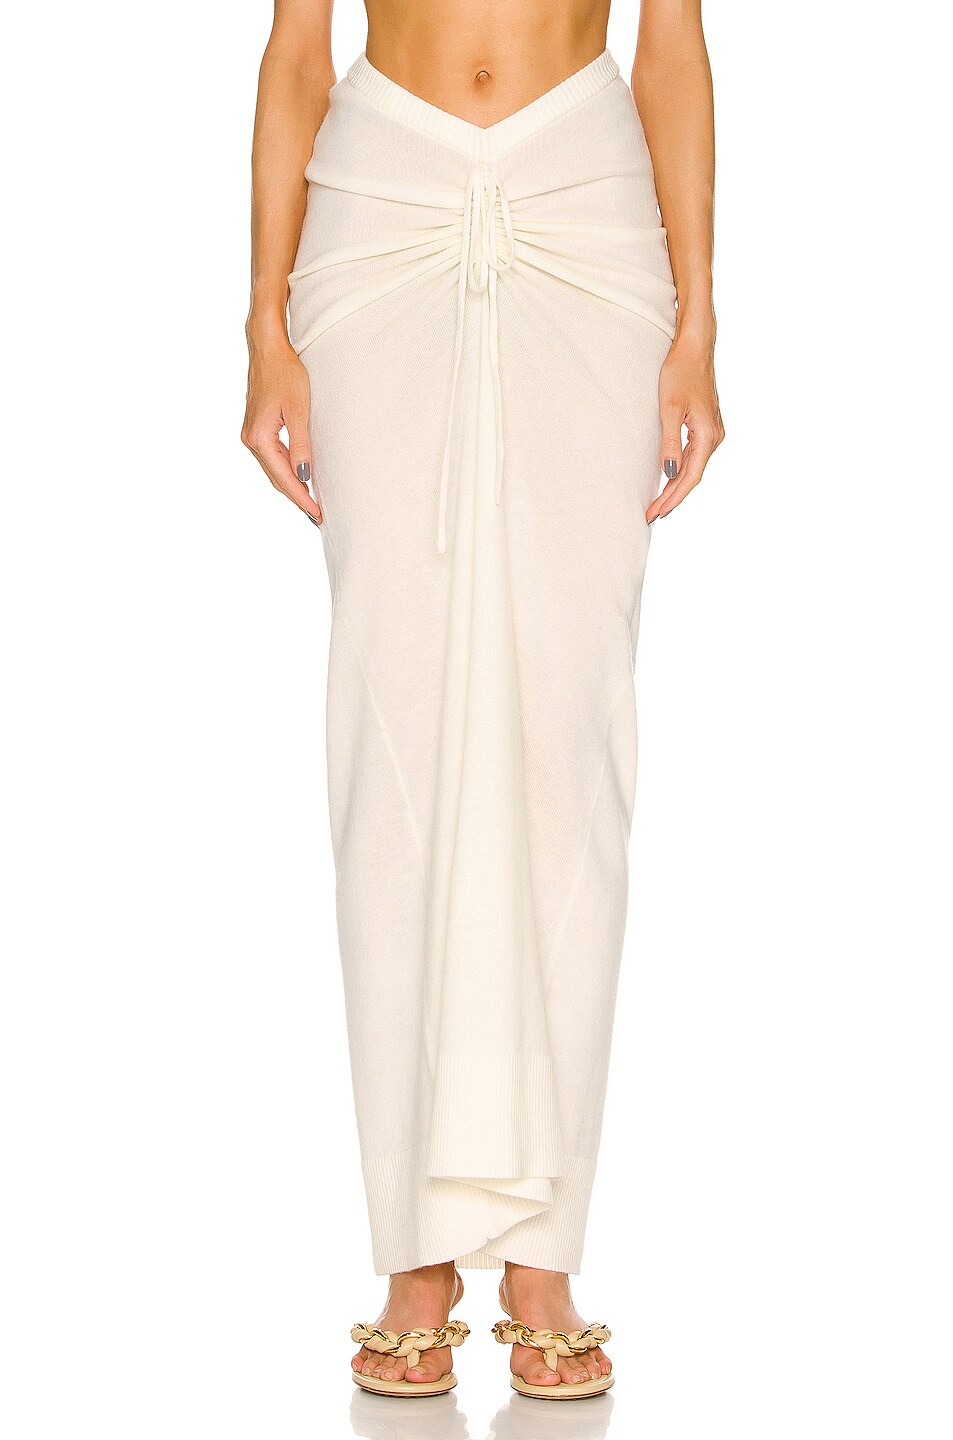 Image 1 of Christopher Esber Elongated Ruched Tie Skirt in Cream